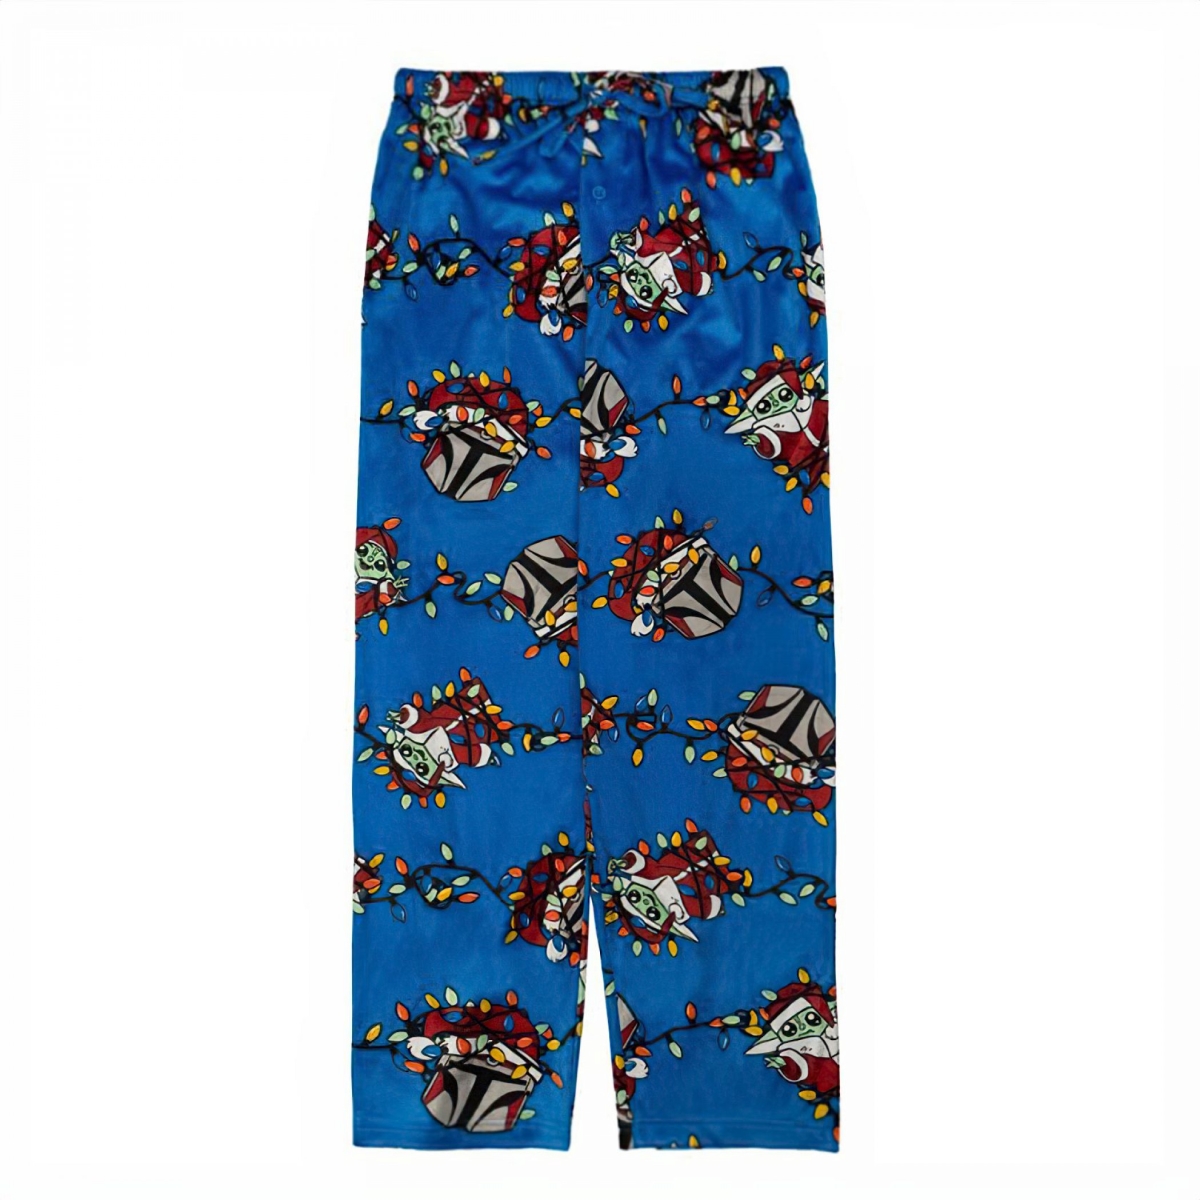 Picture of Star Wars 863644-large-36- Star Wars The Mandalorian Grogu Ready for The Holidays Sleep Pants - Large 36-38